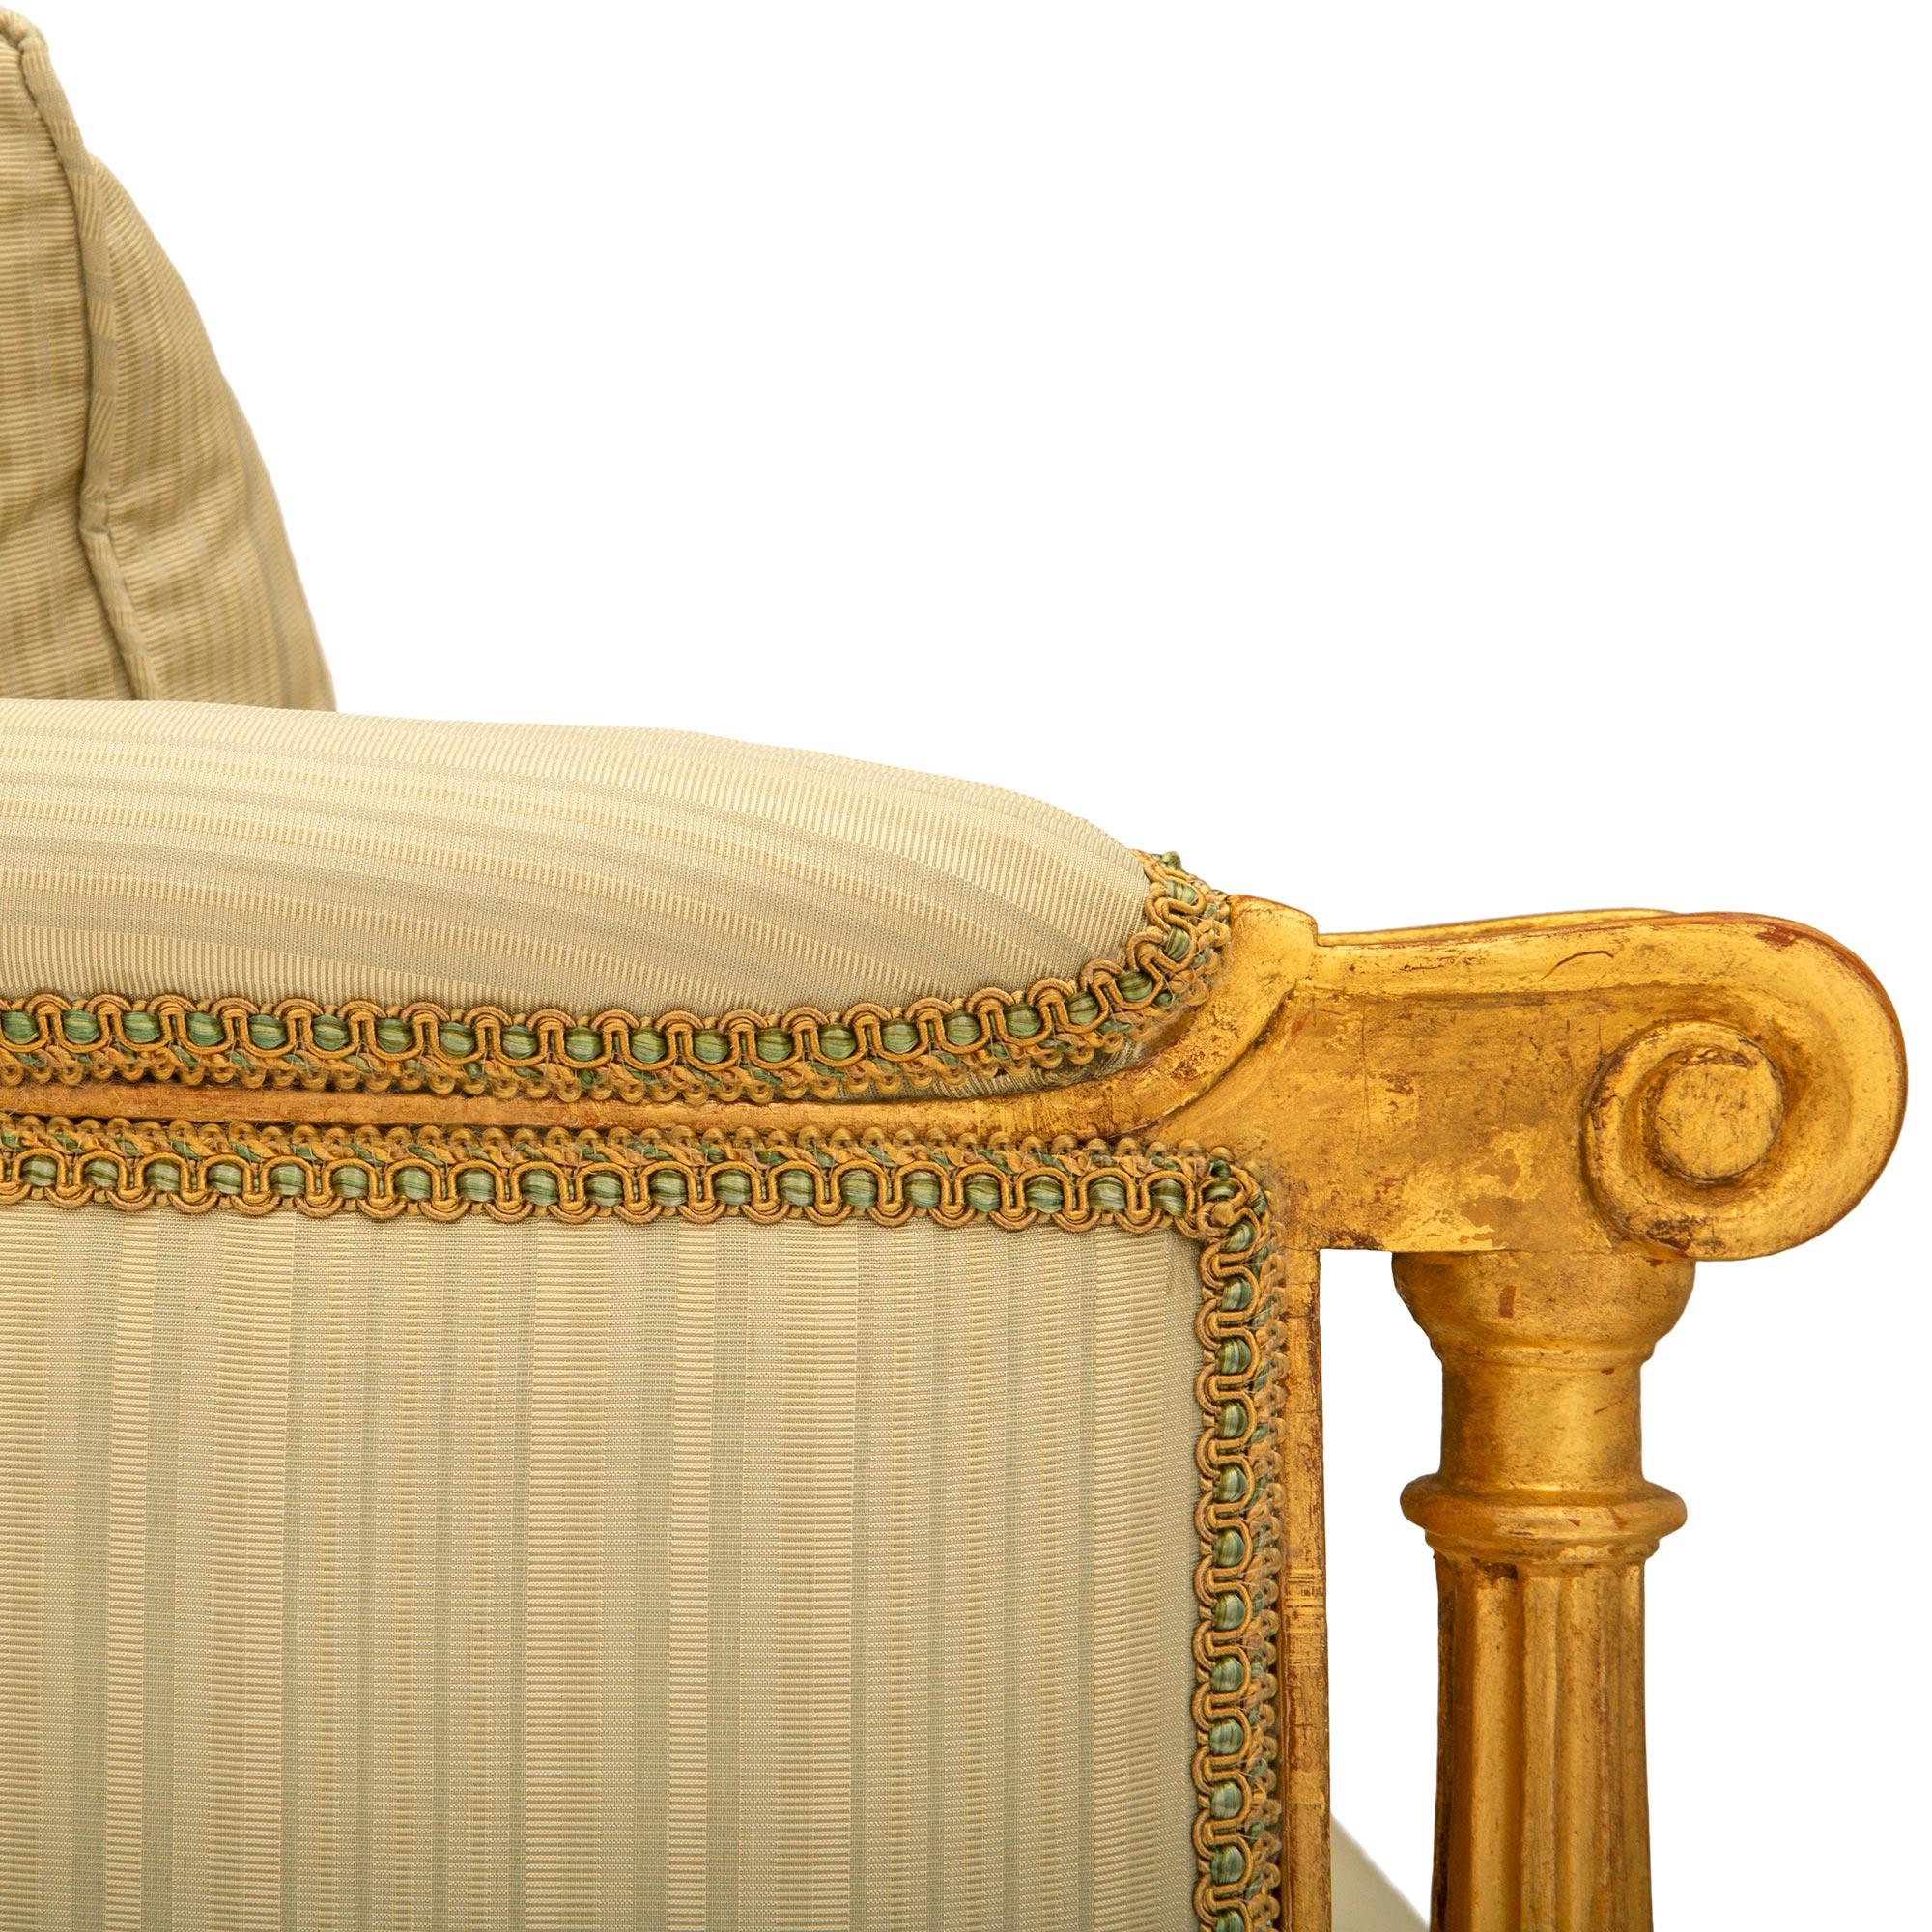 French 18th Century Louis XVI Period Giltwood Canapé Settee For Sale 1